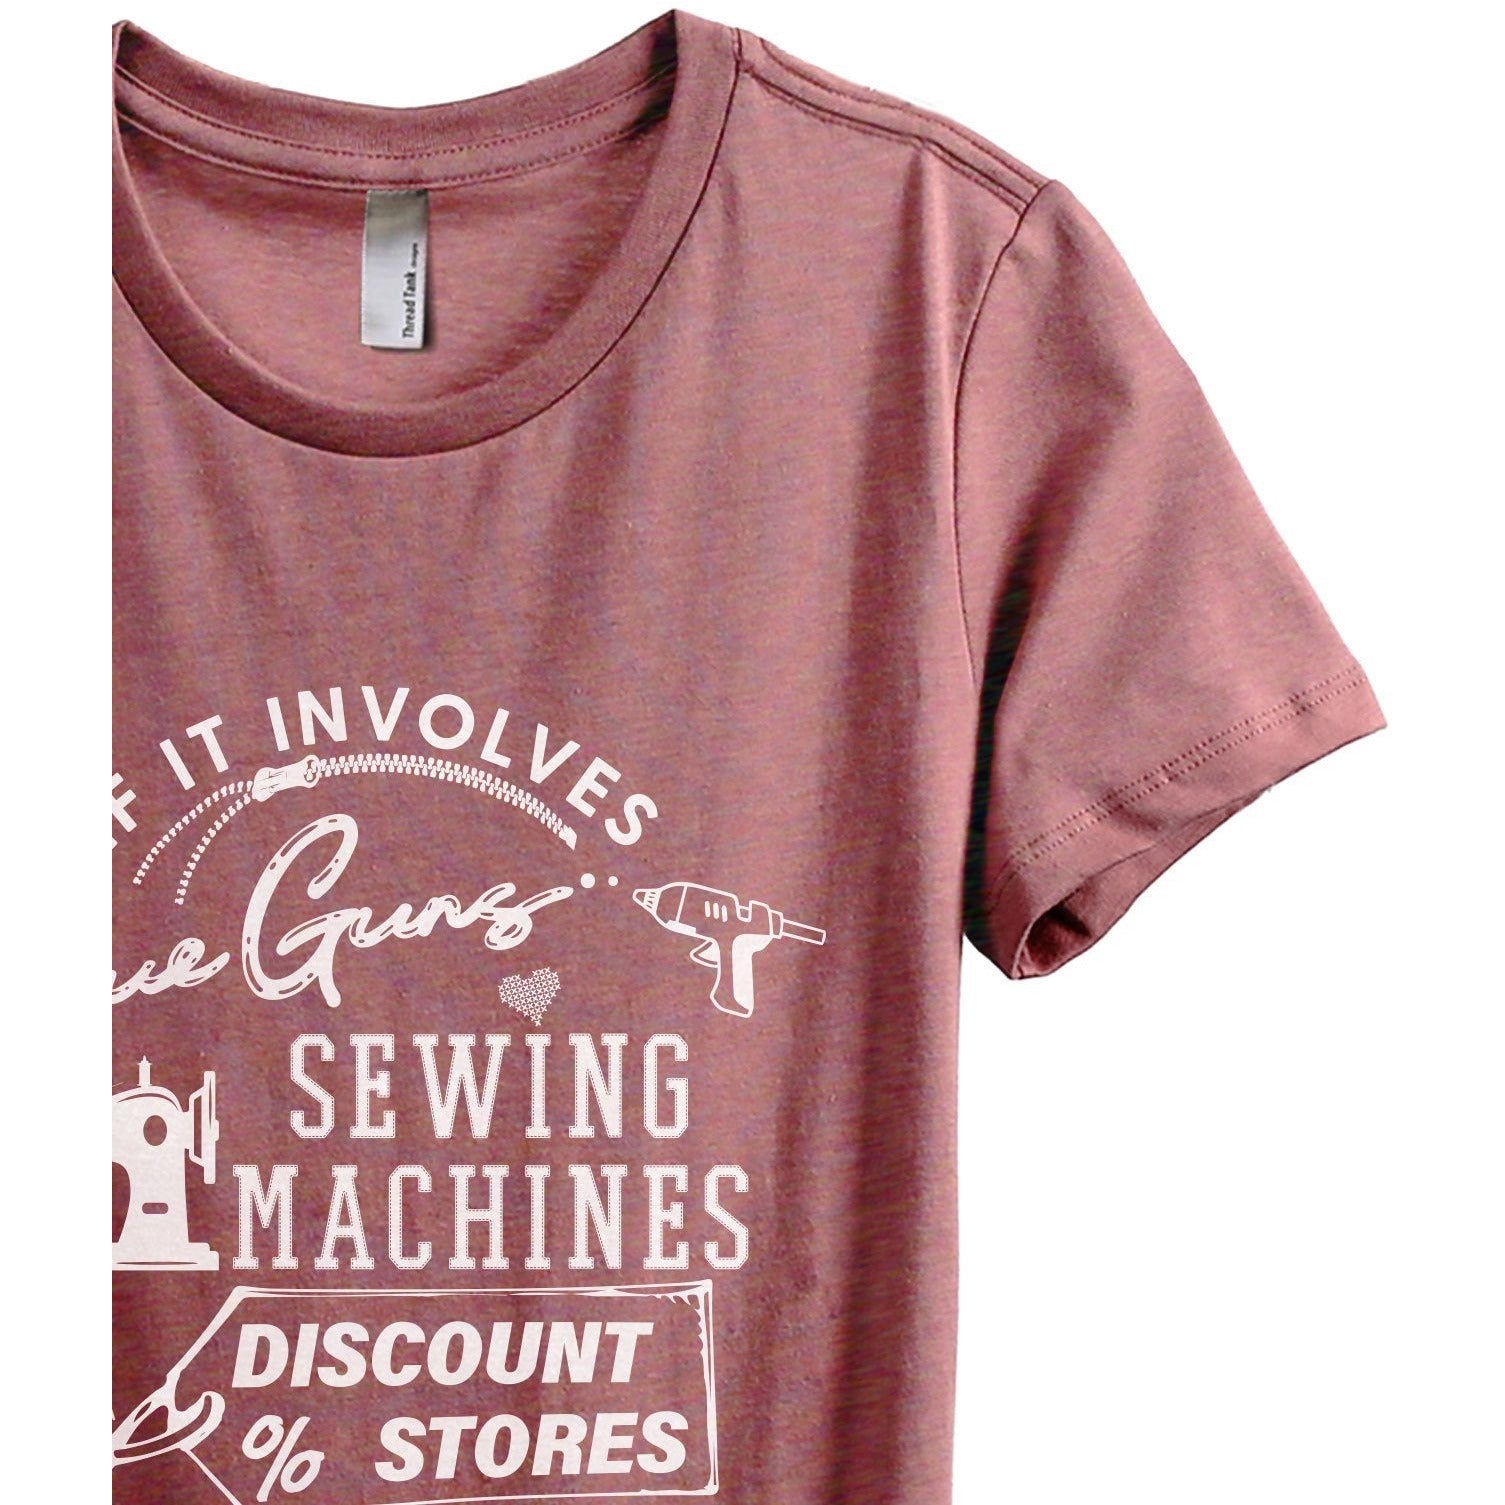 Glue Guns Sewing Machines And Discount Stores Women's Relaxed Crewneck T-Shirt Top Tee Heather Rouge Zoom Details
